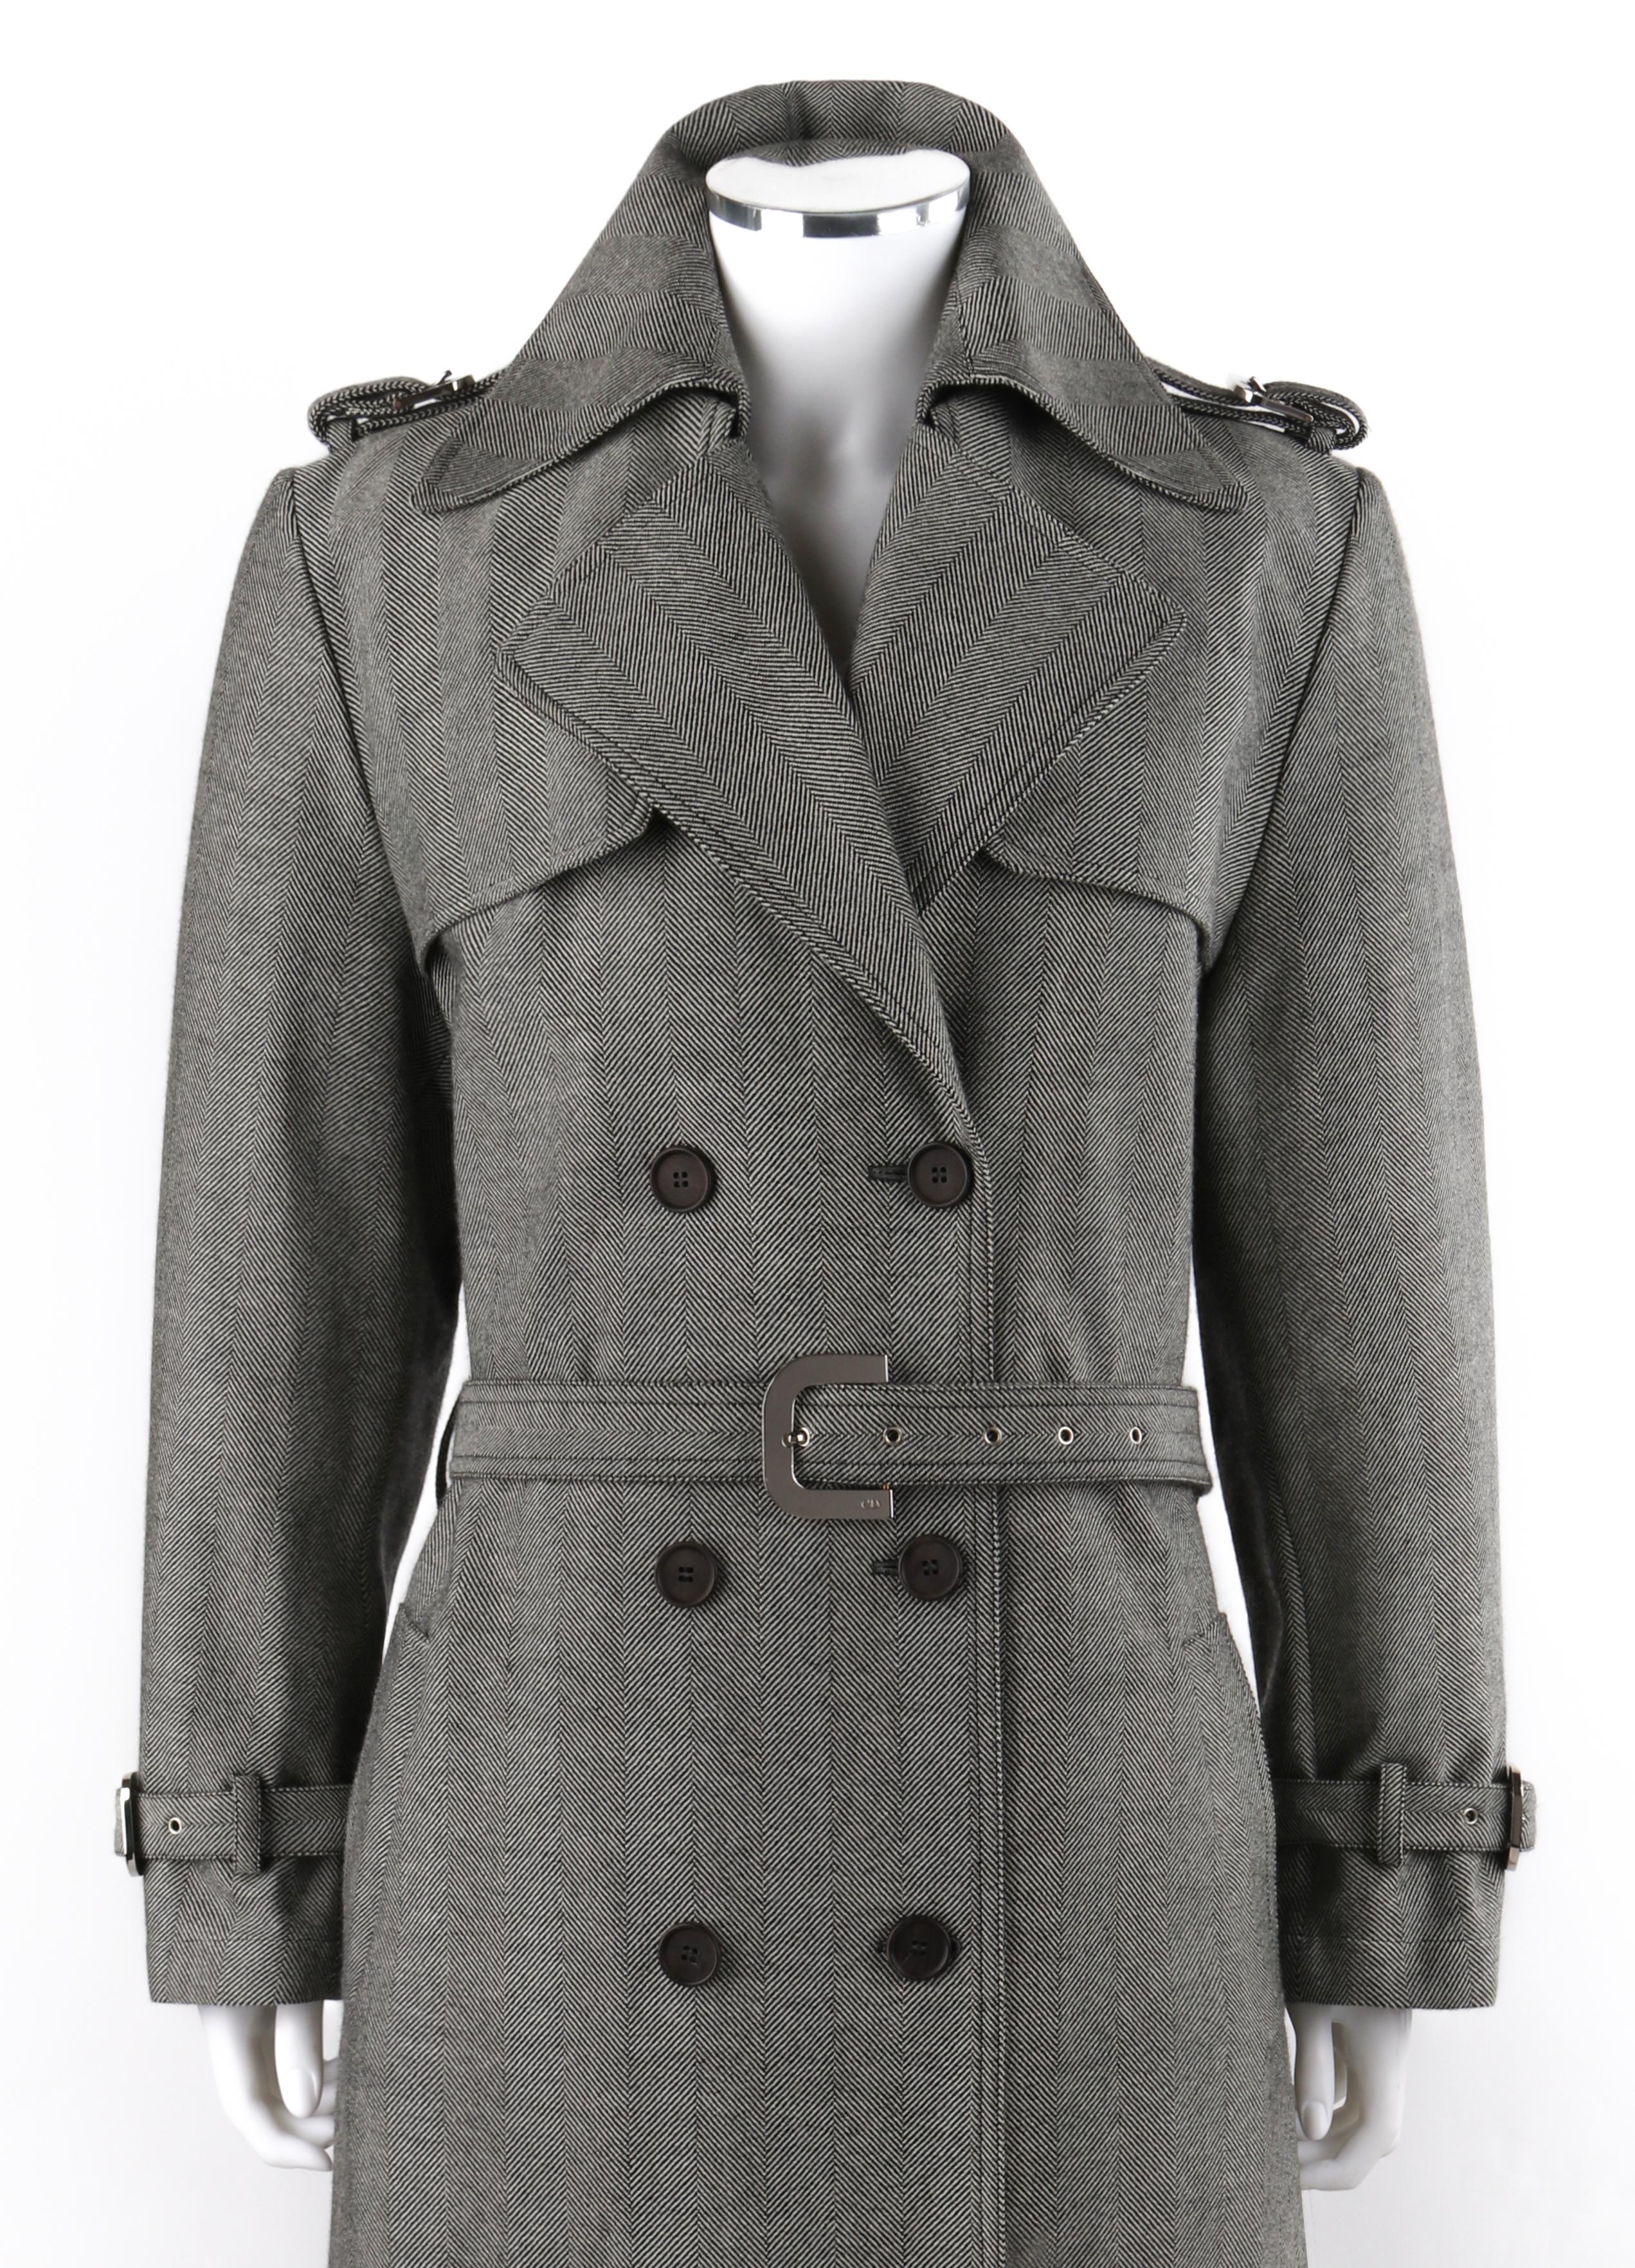 CHRISTIAN DIOR Boutique c.2000’s Herringbone Double Breasted Belted Trench Coat
 
Brand / Manufacturer: Christian Dior
Circa: 2000’s
Style: Belted trench coat
Color(s): Gray and white
Lined: Yes
Marked Fabric Content: “76% Wool, 24%